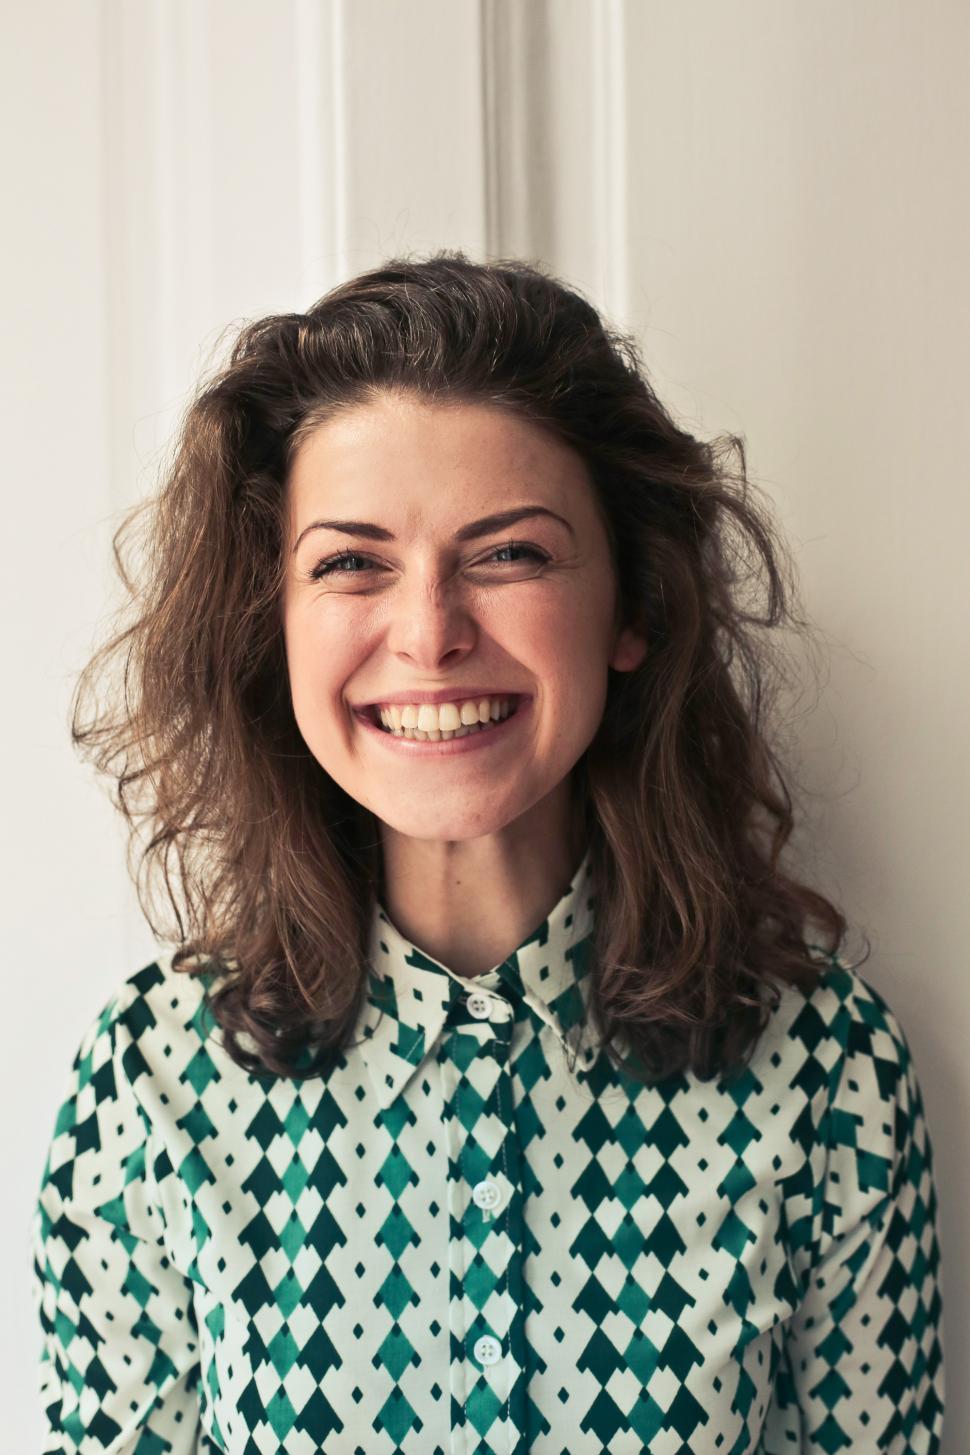 Free Image of Young woman in printed collared shirt seen smiling as looking at 